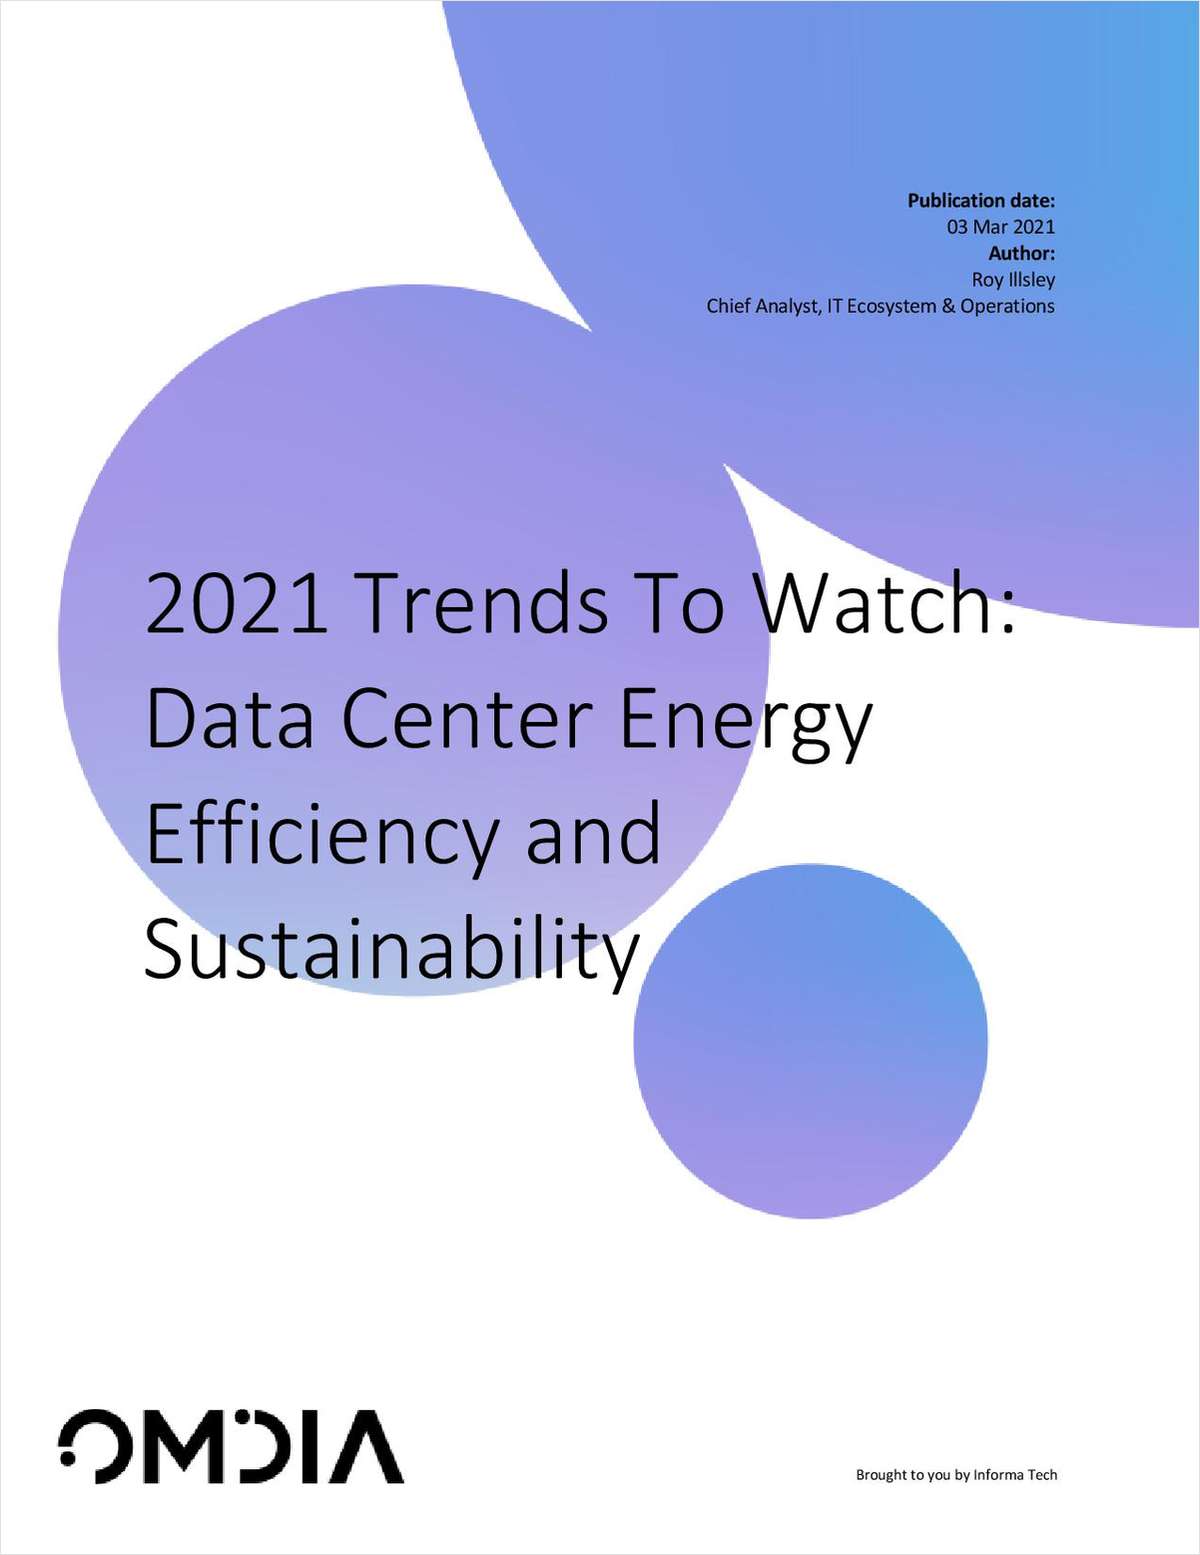 2021 Trends To Watch: Data Center Energy Efficiency and Sustainability